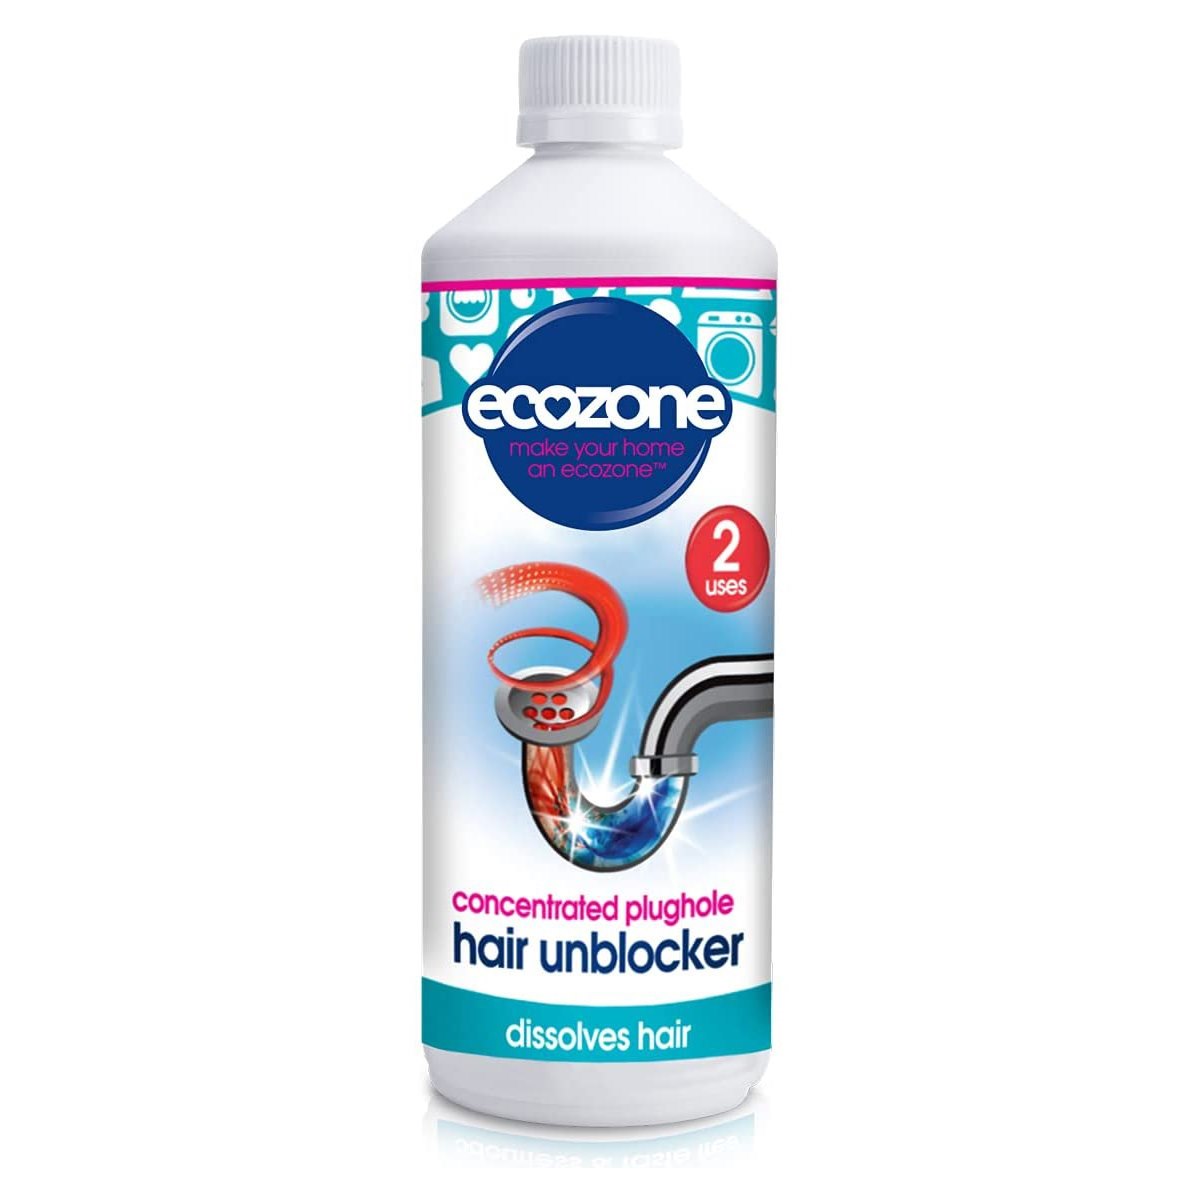 Ecozone Concentrated Plughole Hair Unblocker 250ml